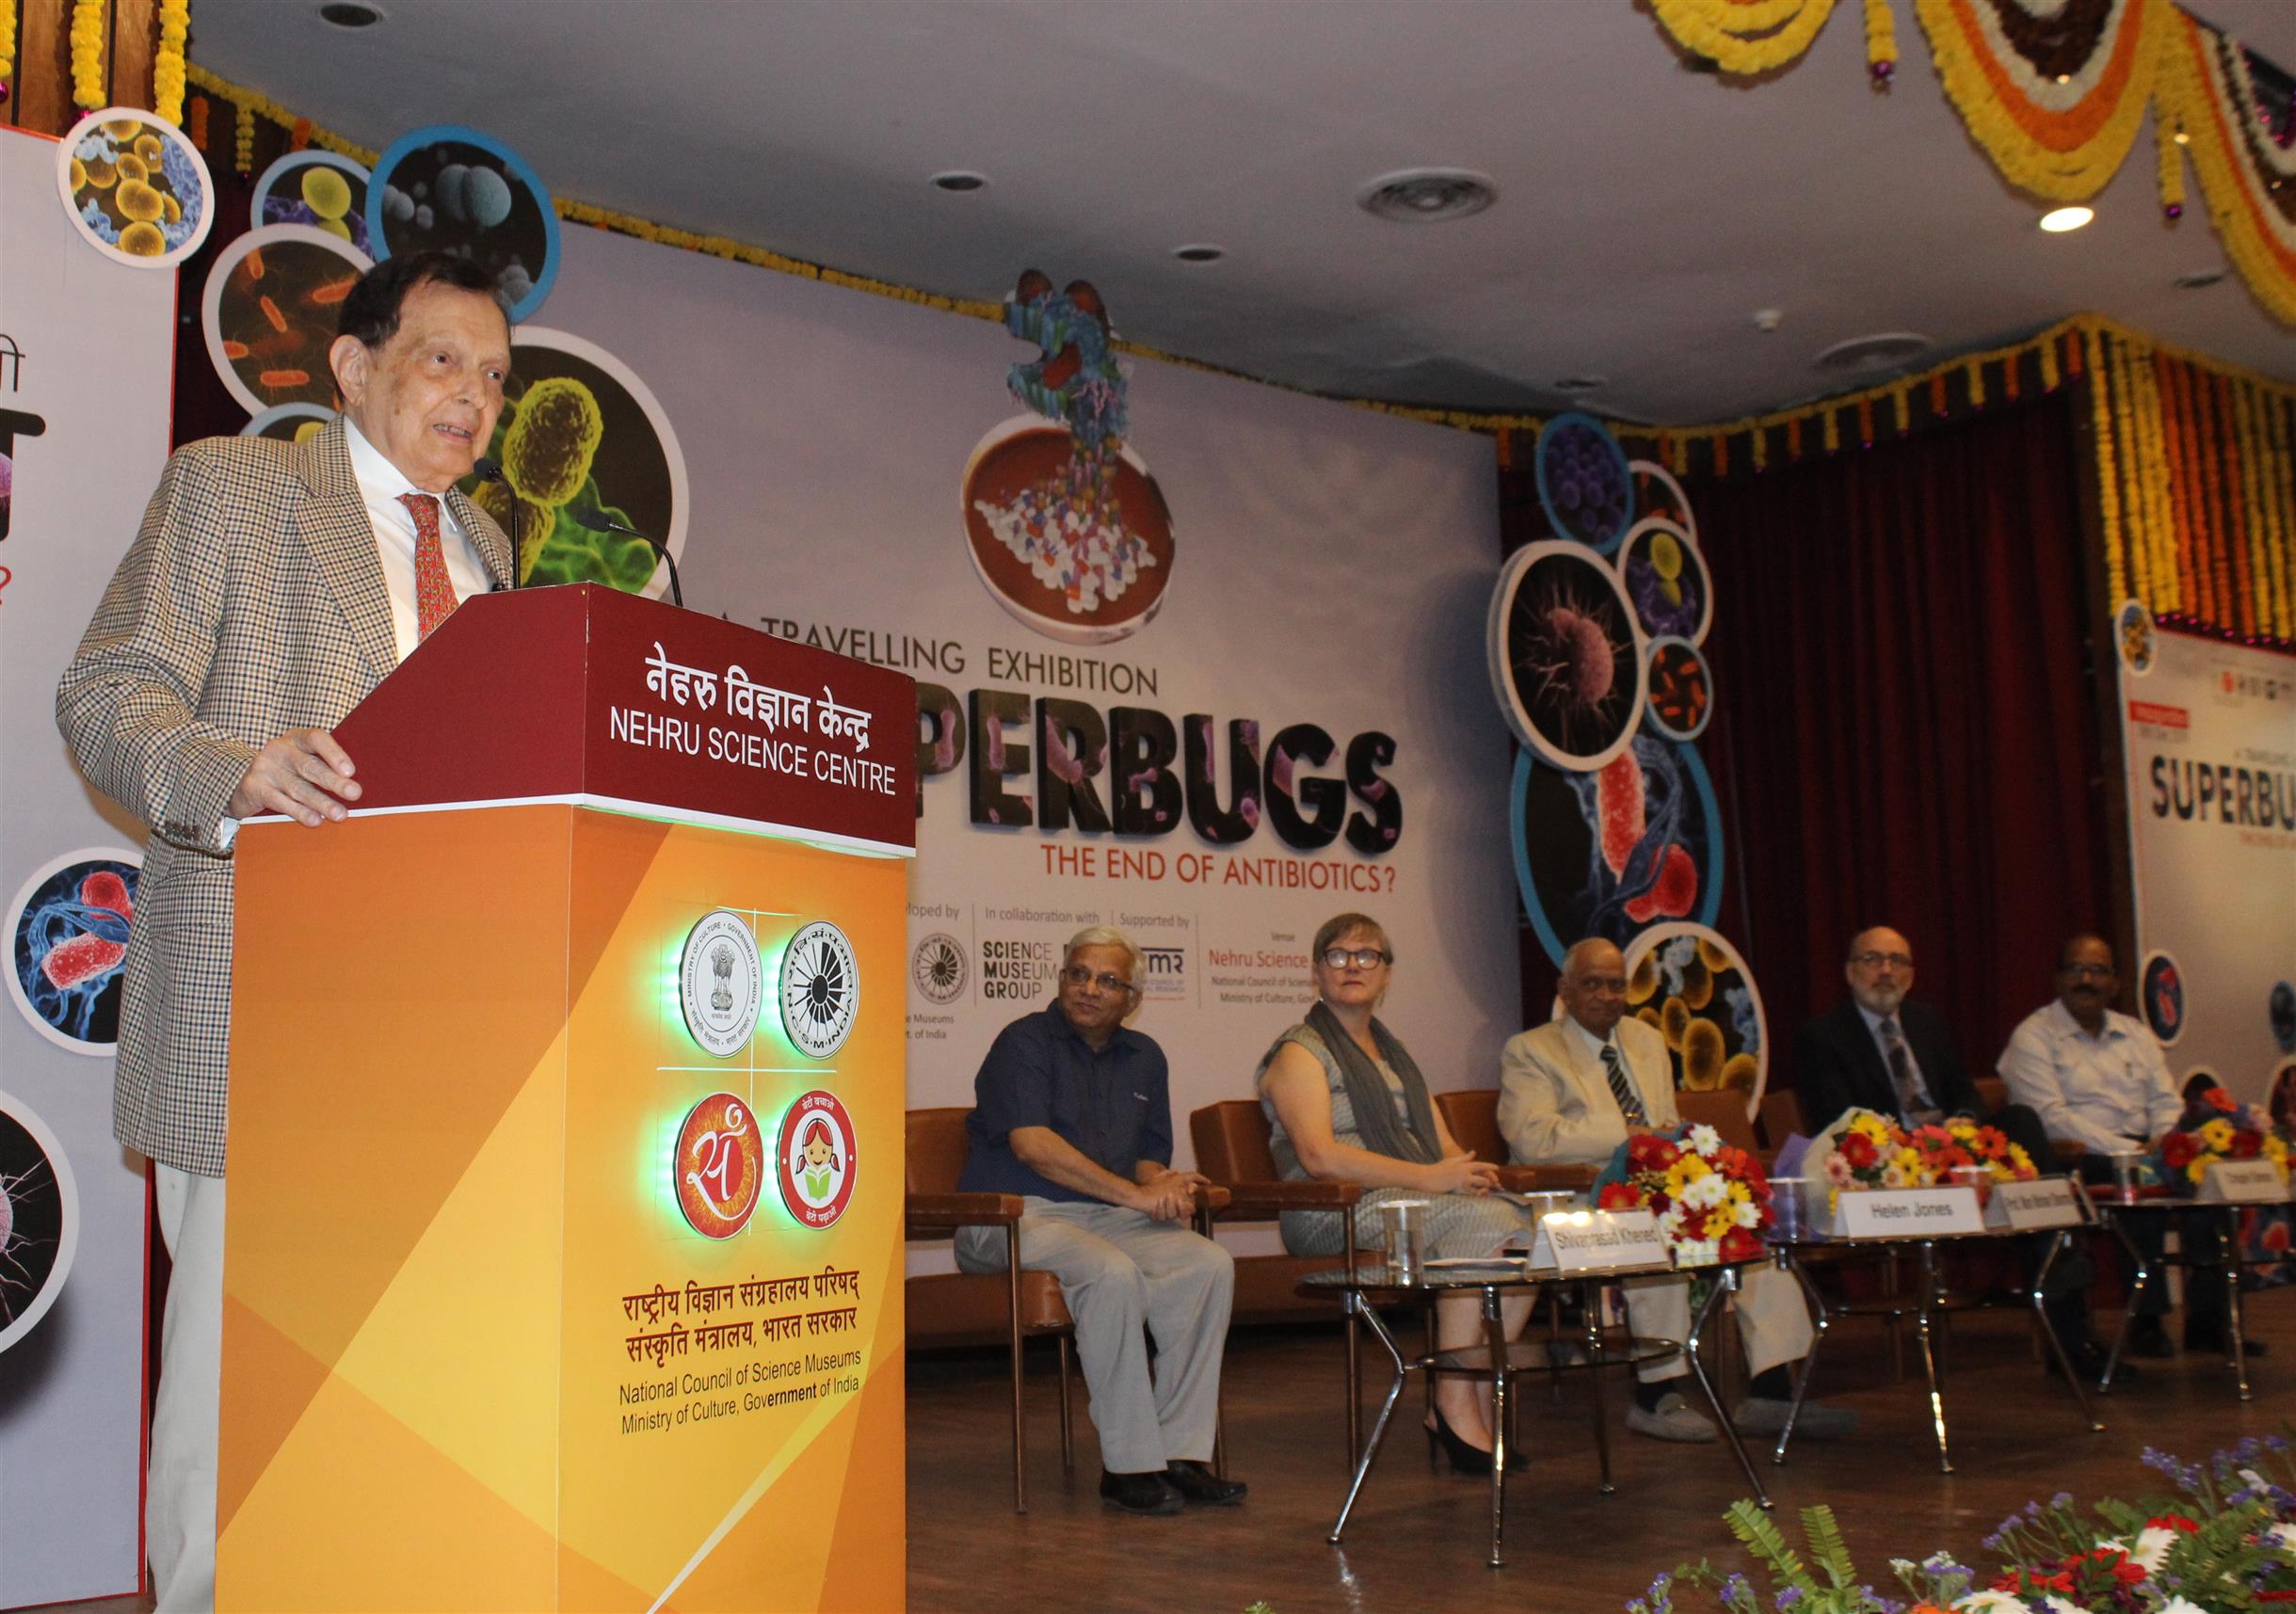 Eminent physician Dr. Farokh E. Udwadia speaking at the inauguration of a travelling exhibition titled “Superbugs: The End of Antibiotics?” at Nehru Science Centre in Mumbai on 18.12.2019